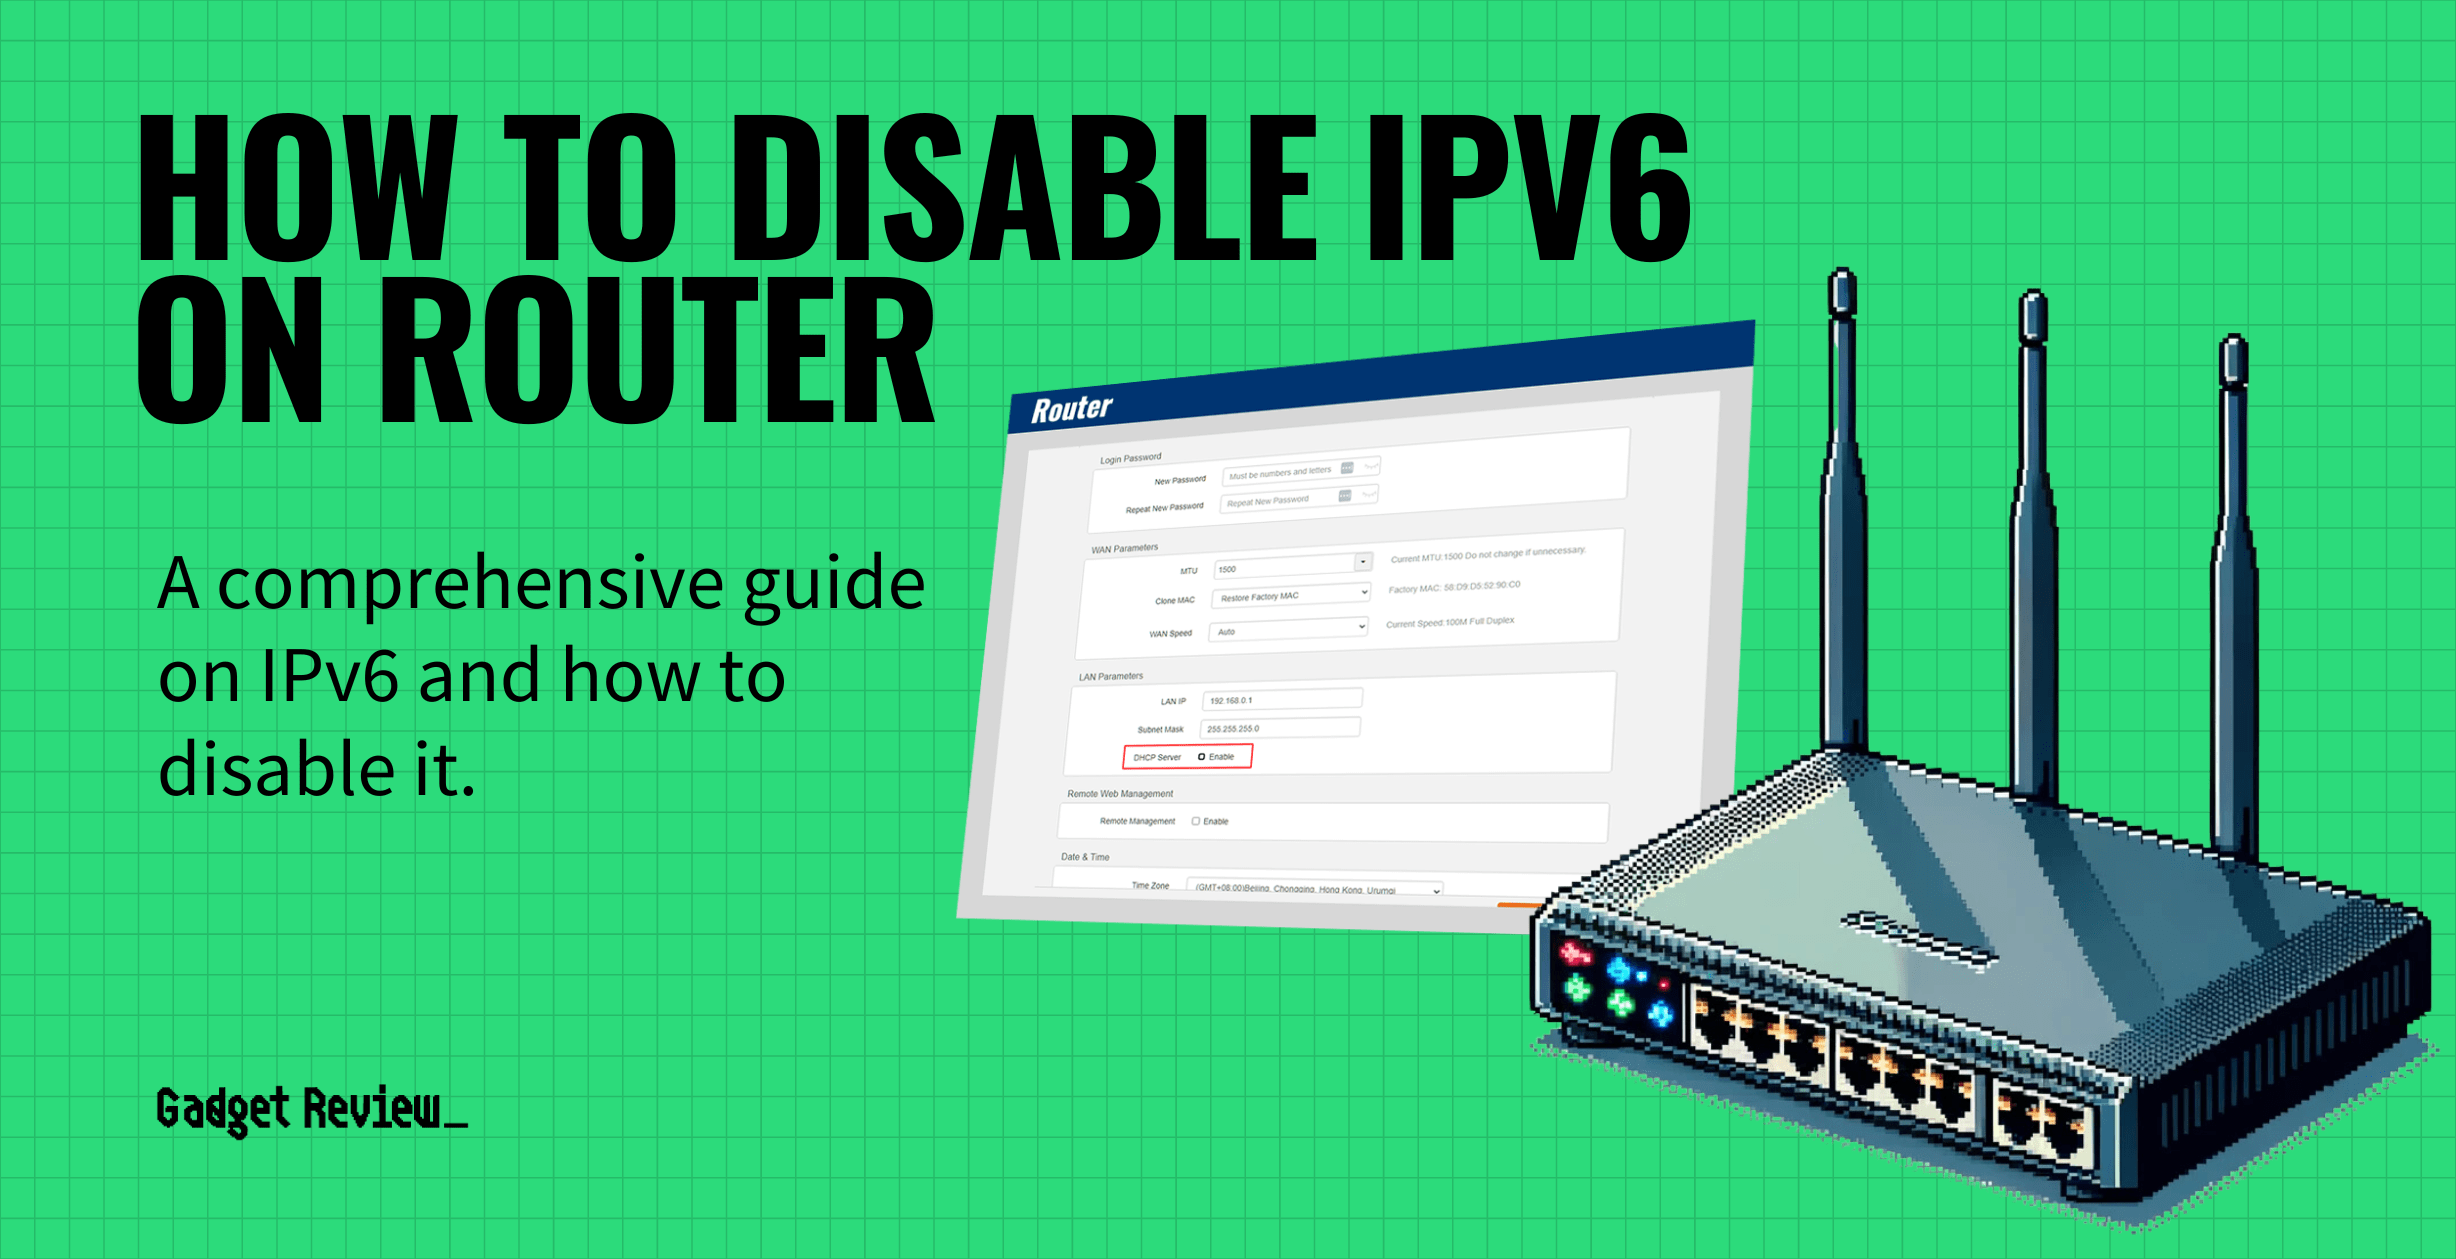 how to disable ipv6 on router guide